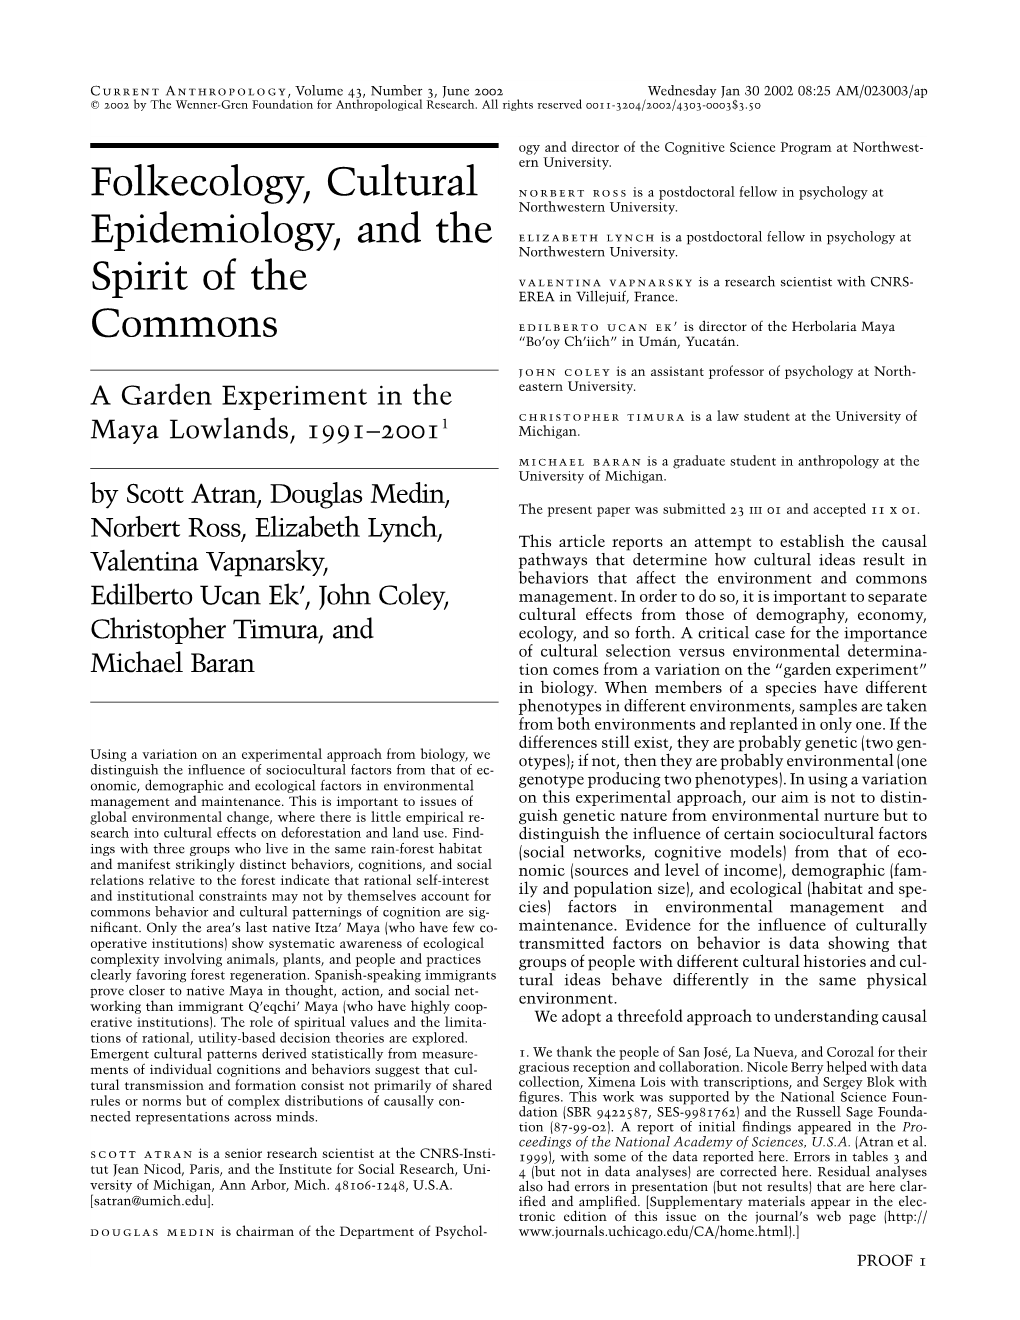 Folkecology, Cultural Epidemiology, and the Commons Spirit F PROOF 3